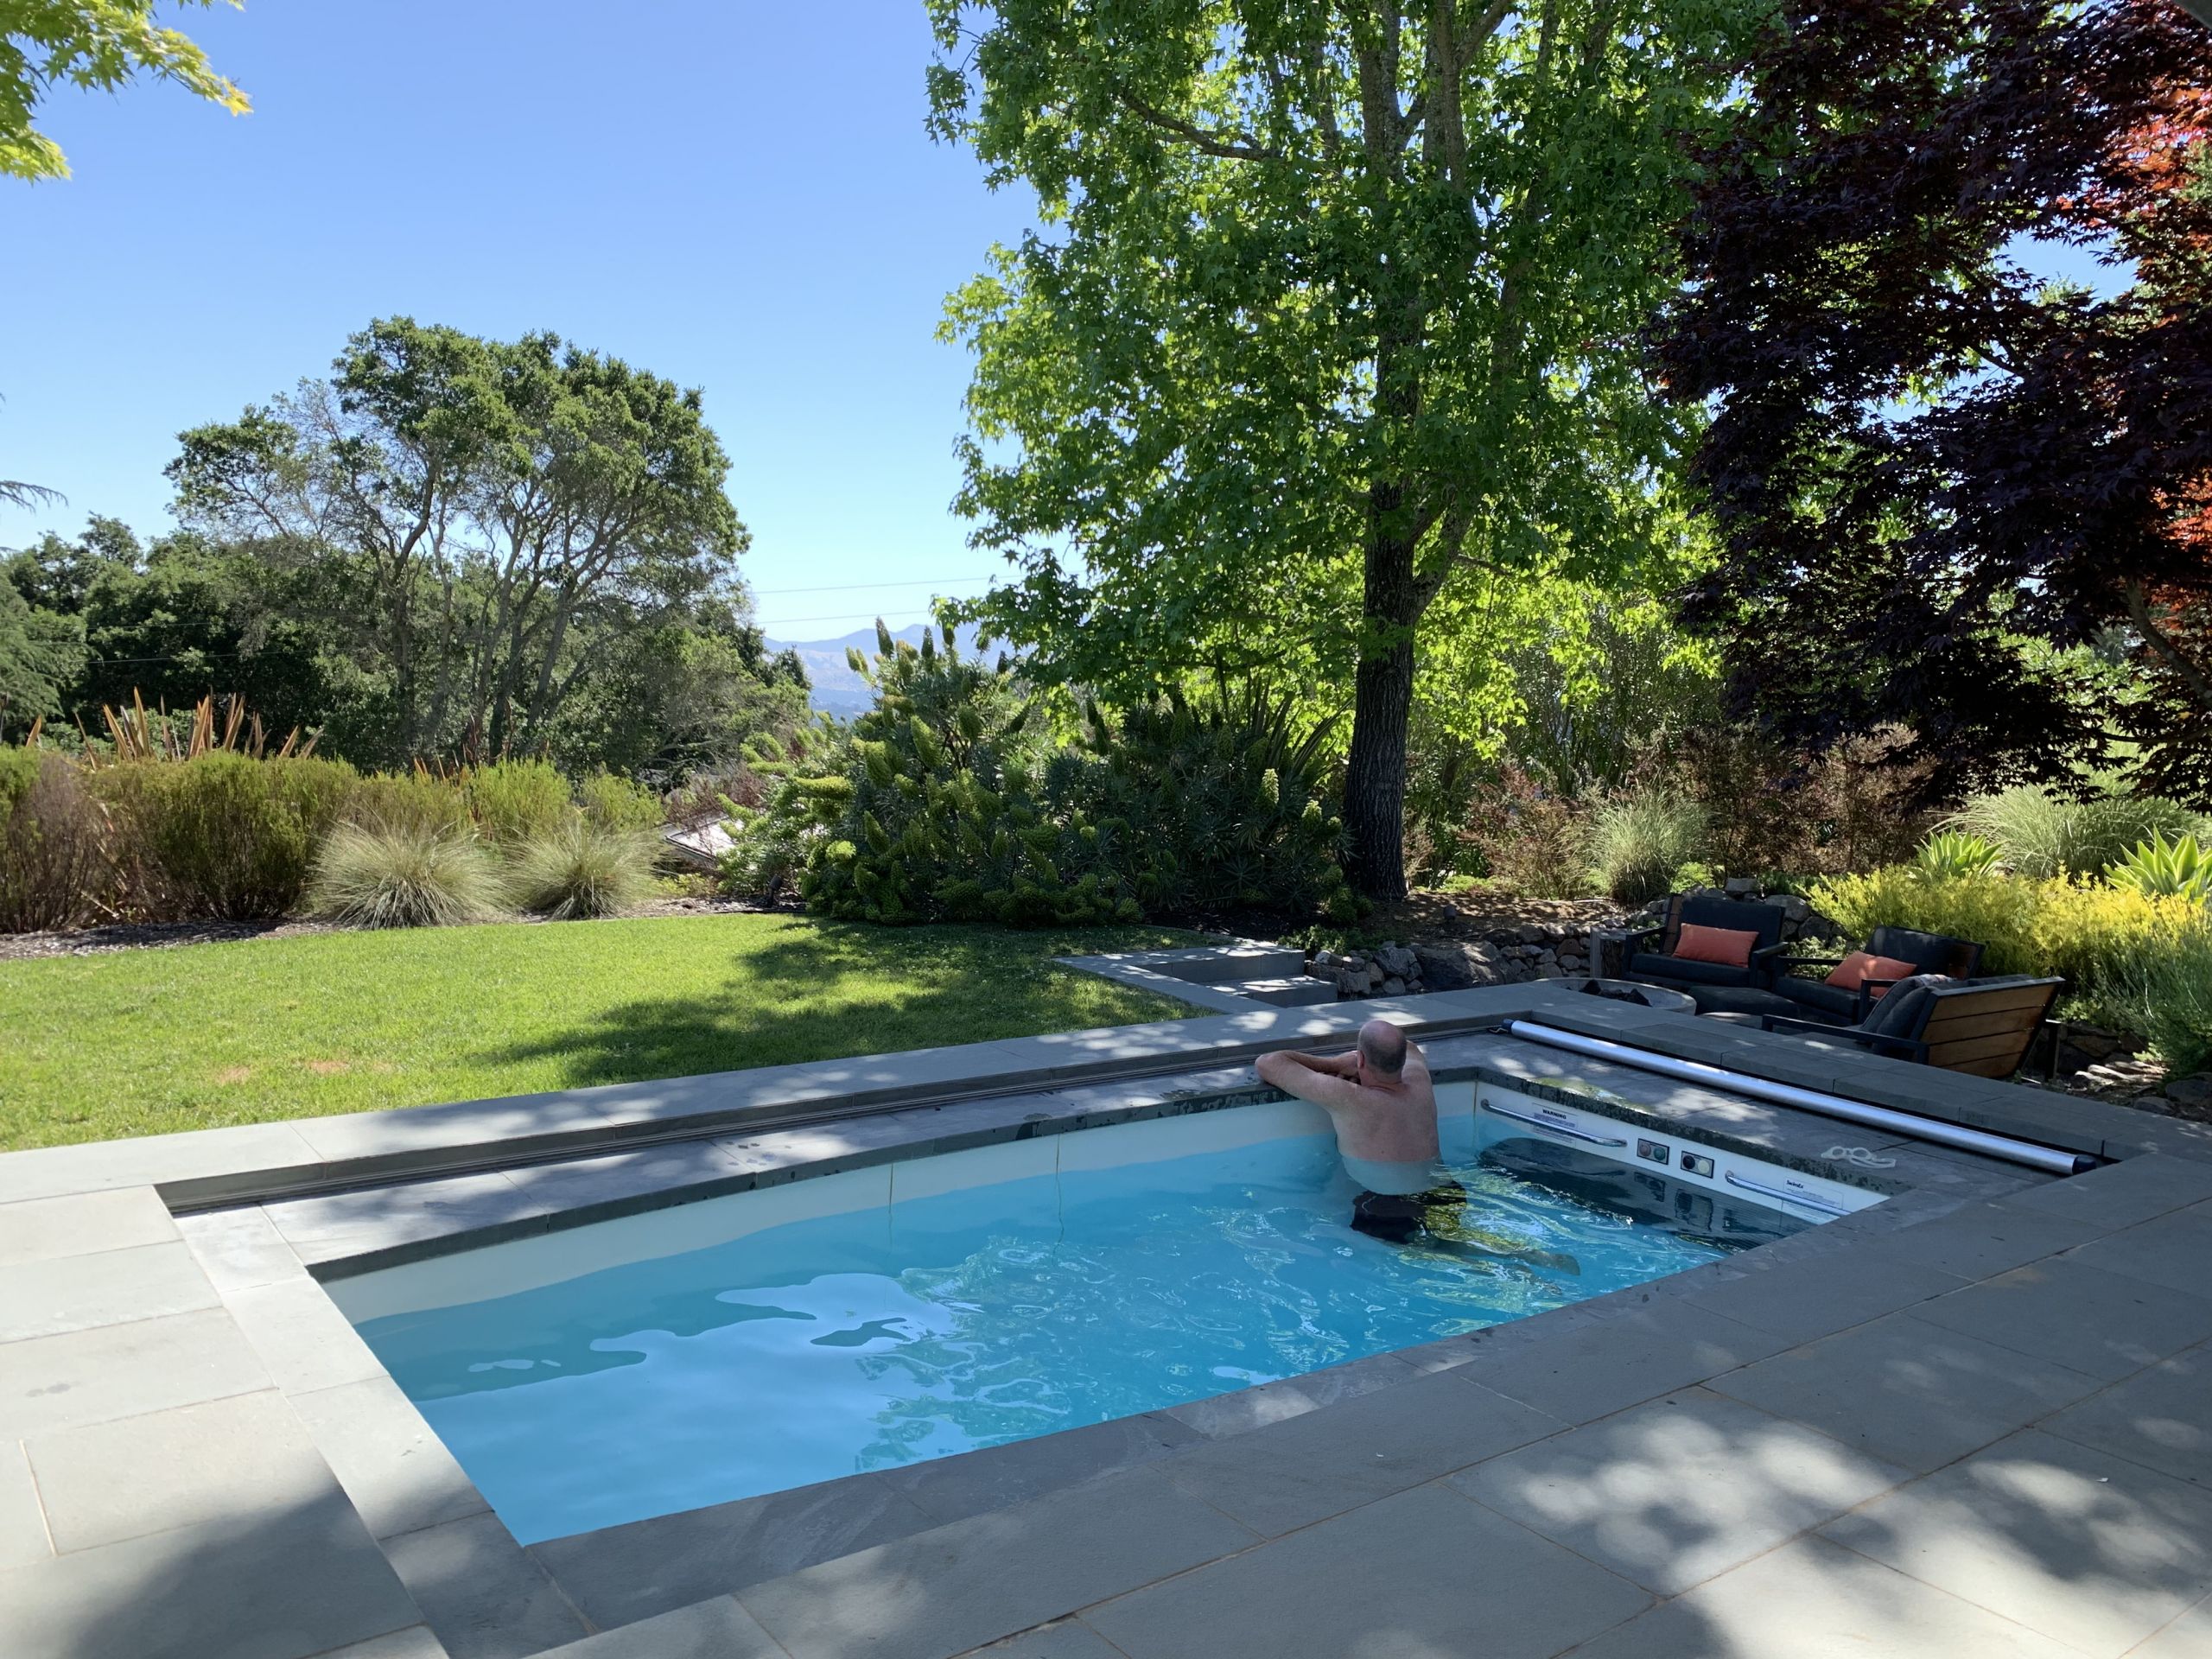 Pools For Small Backyard
 10 Small Backyard Pools for a Dreamy Home Oasis SwimEx